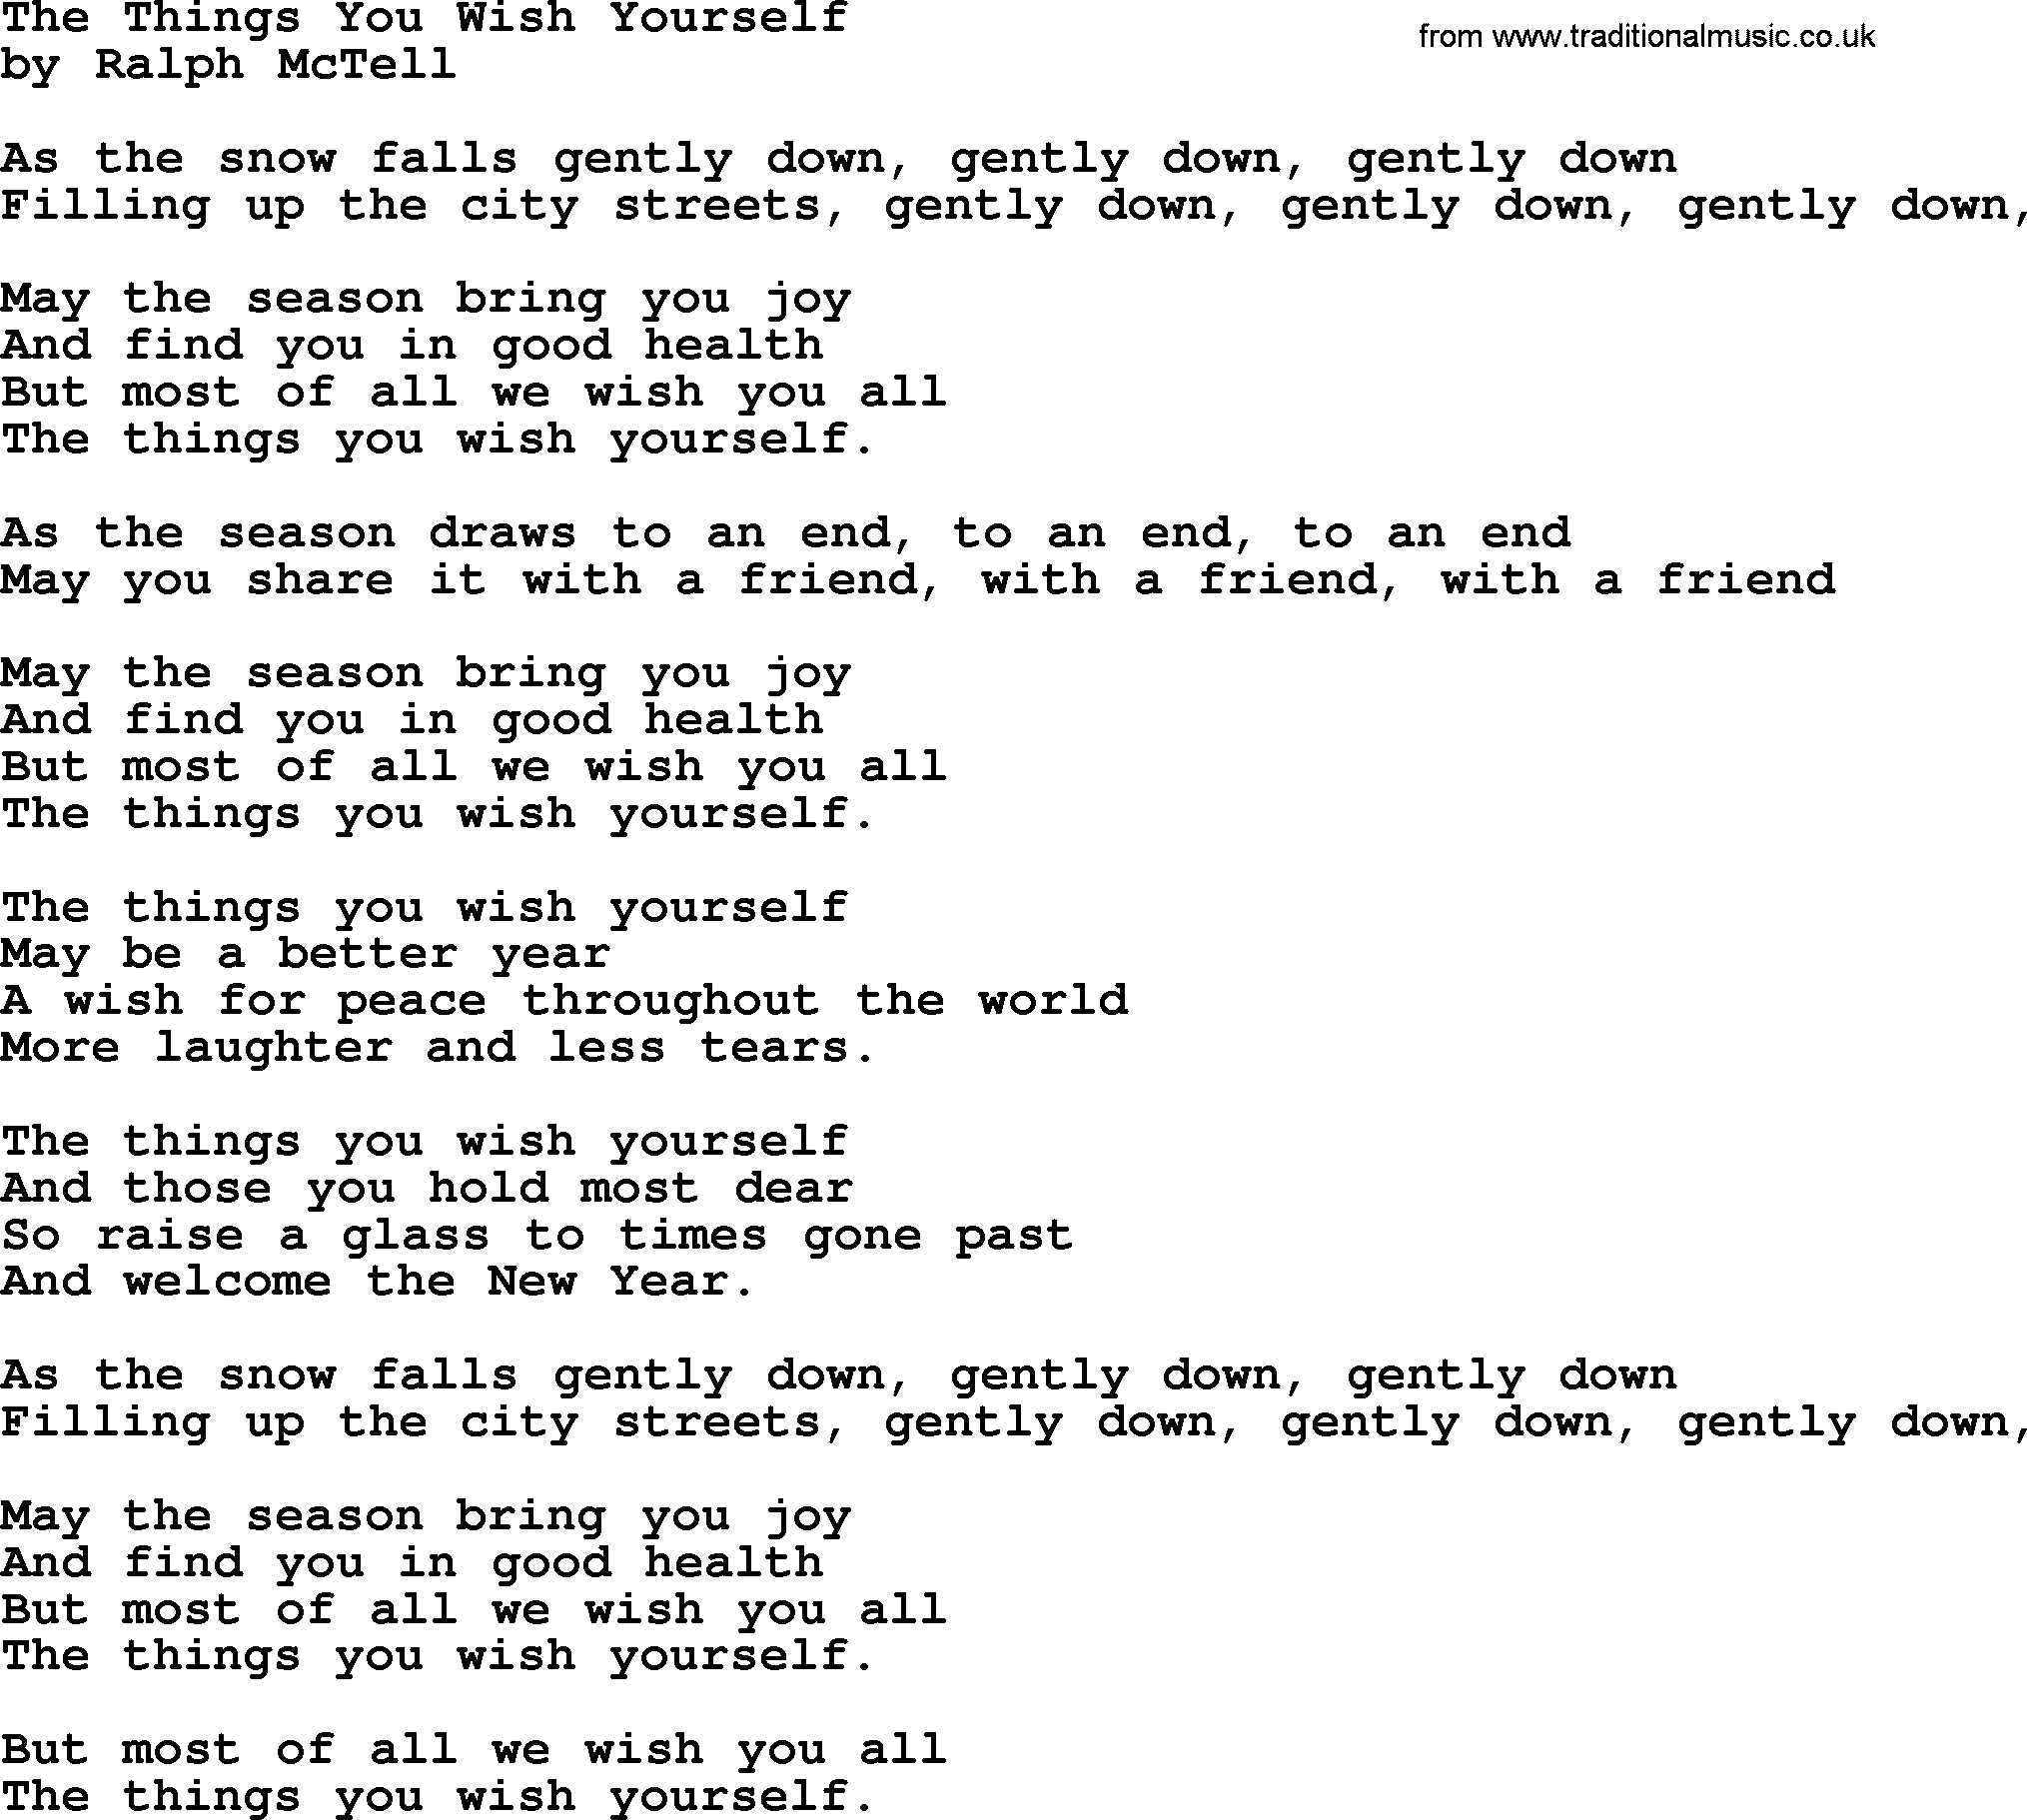 Ralph McTell Song: The Things You Wish Yourself, lyrics